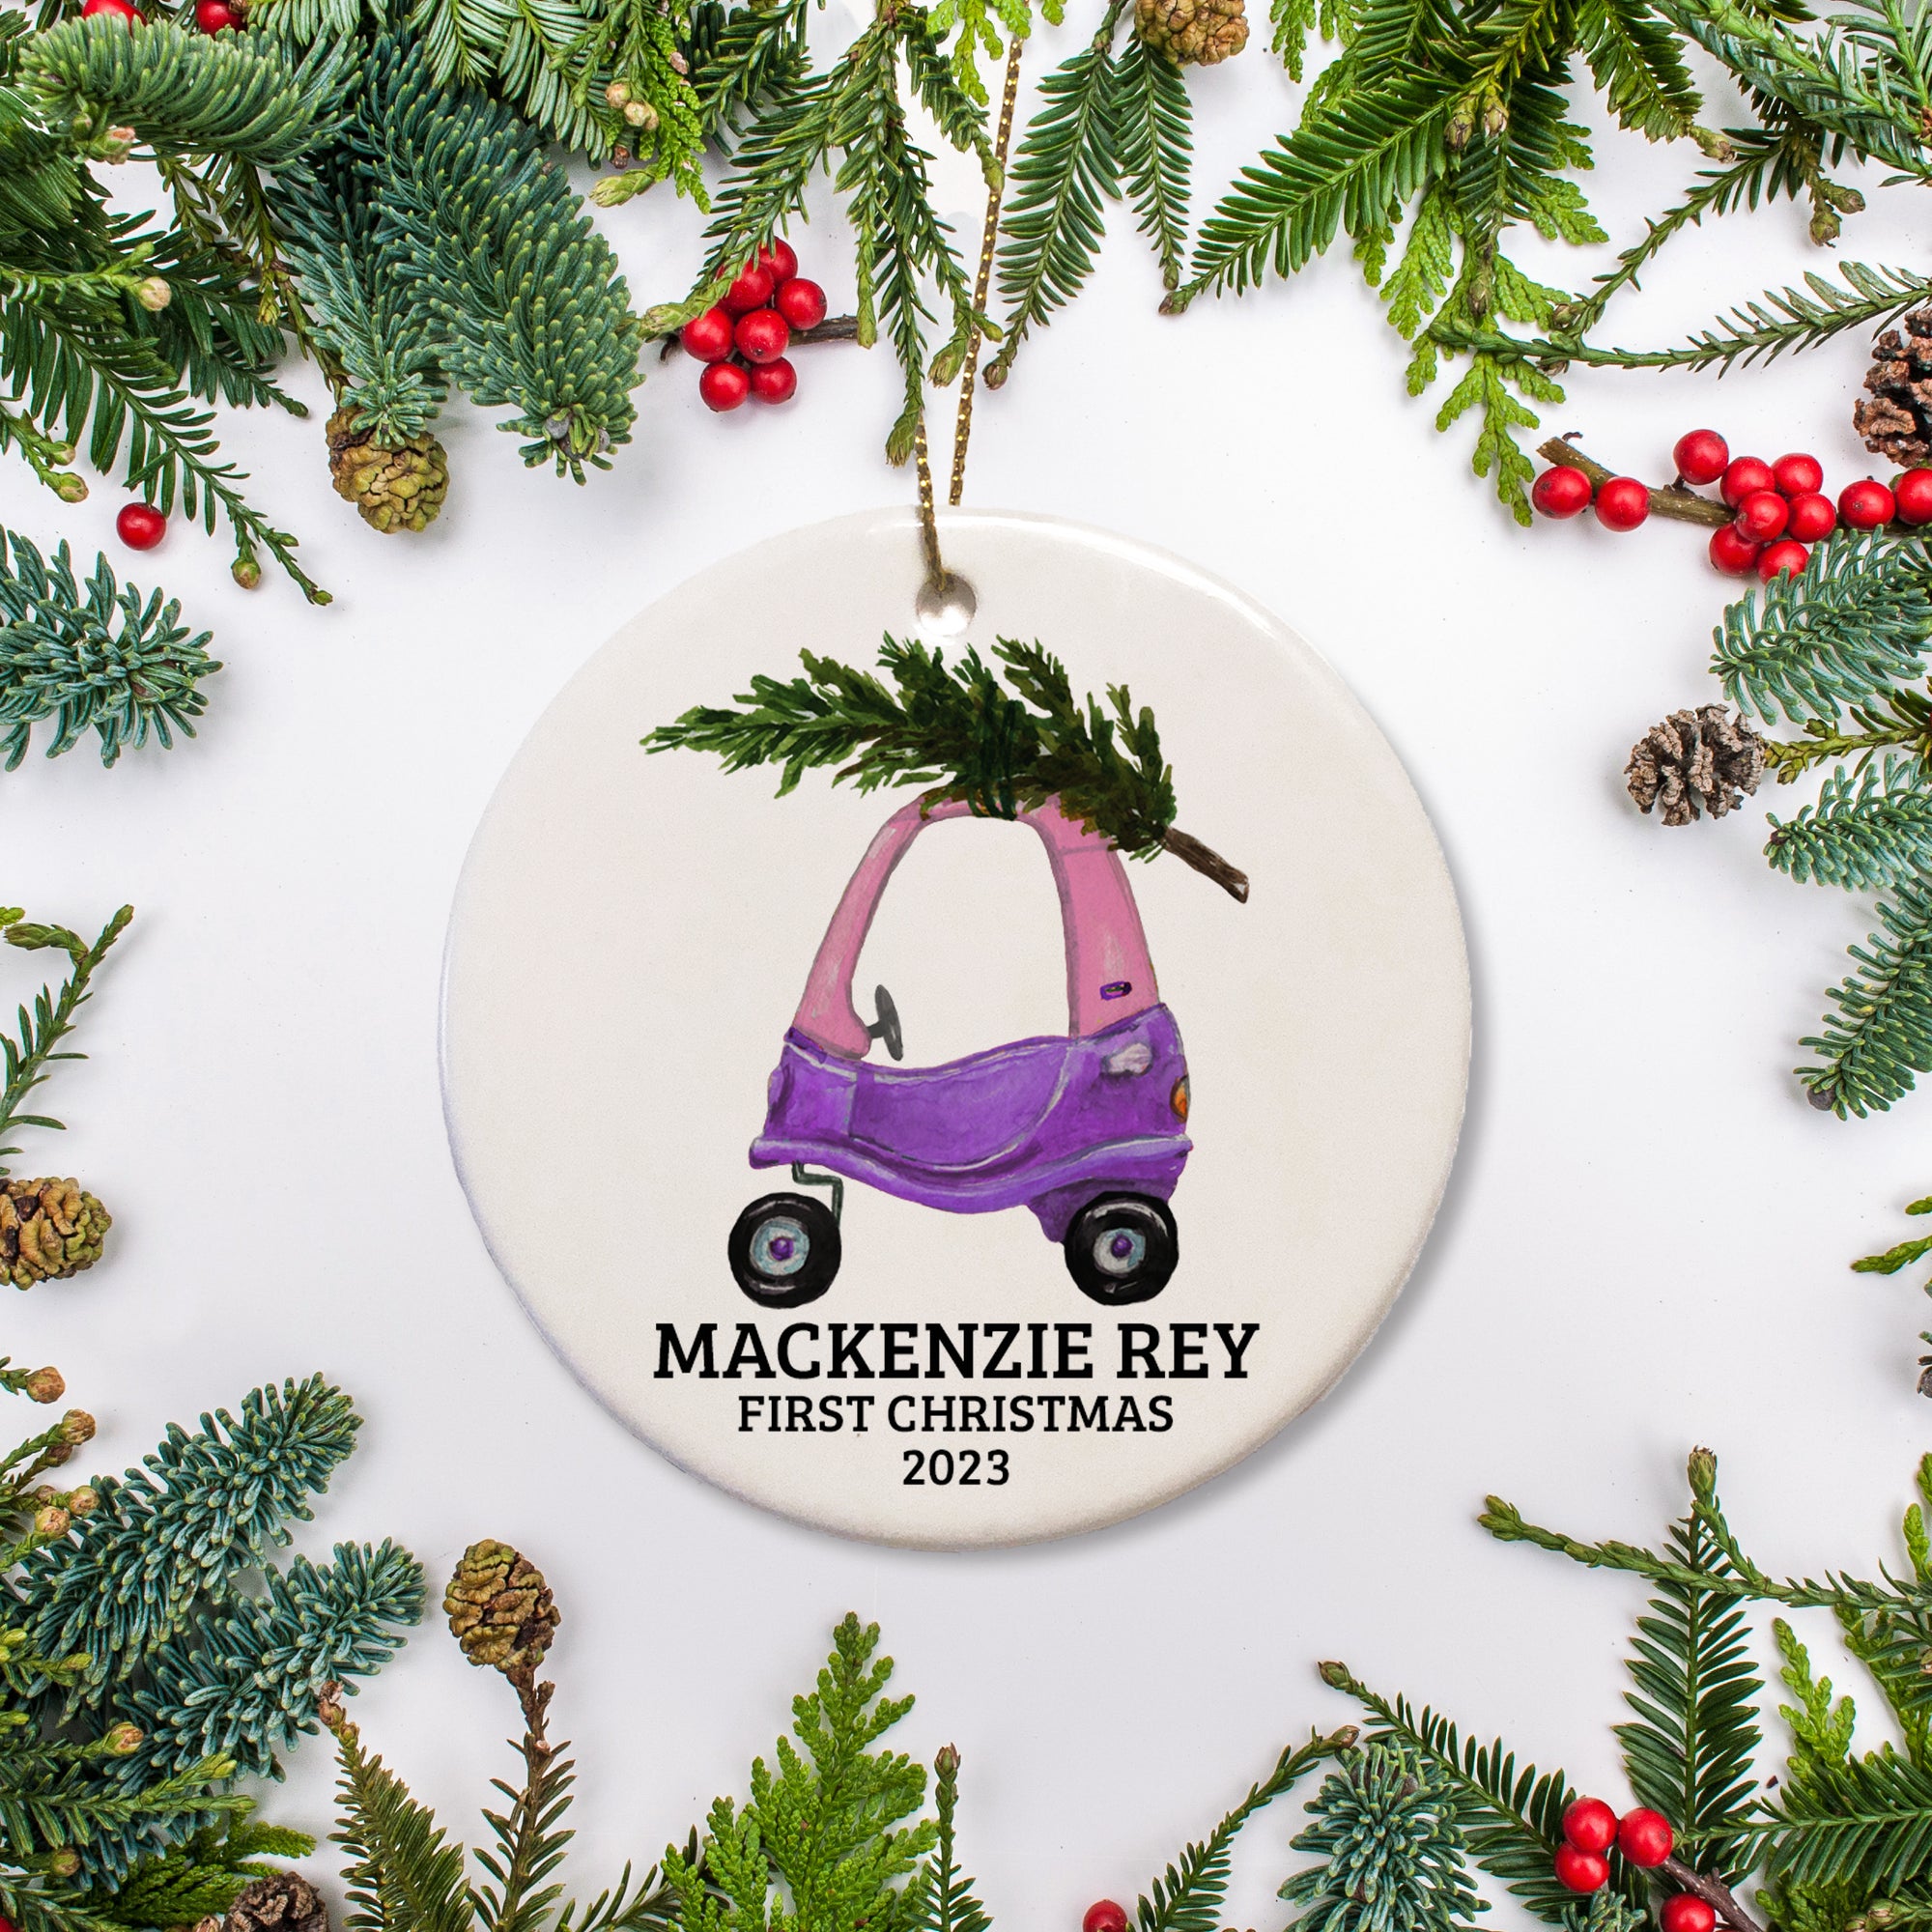 This personalized toy car Christmas ornament with tree is the perfect keepsake gift for a child or great way to commemorate baby's first Christmas. keepsake, baby Christmas ornament, gift for babys first Christmas, baby's 1st, grandchild Christmas gift, create an annual tradition with the gift a personalized ornament